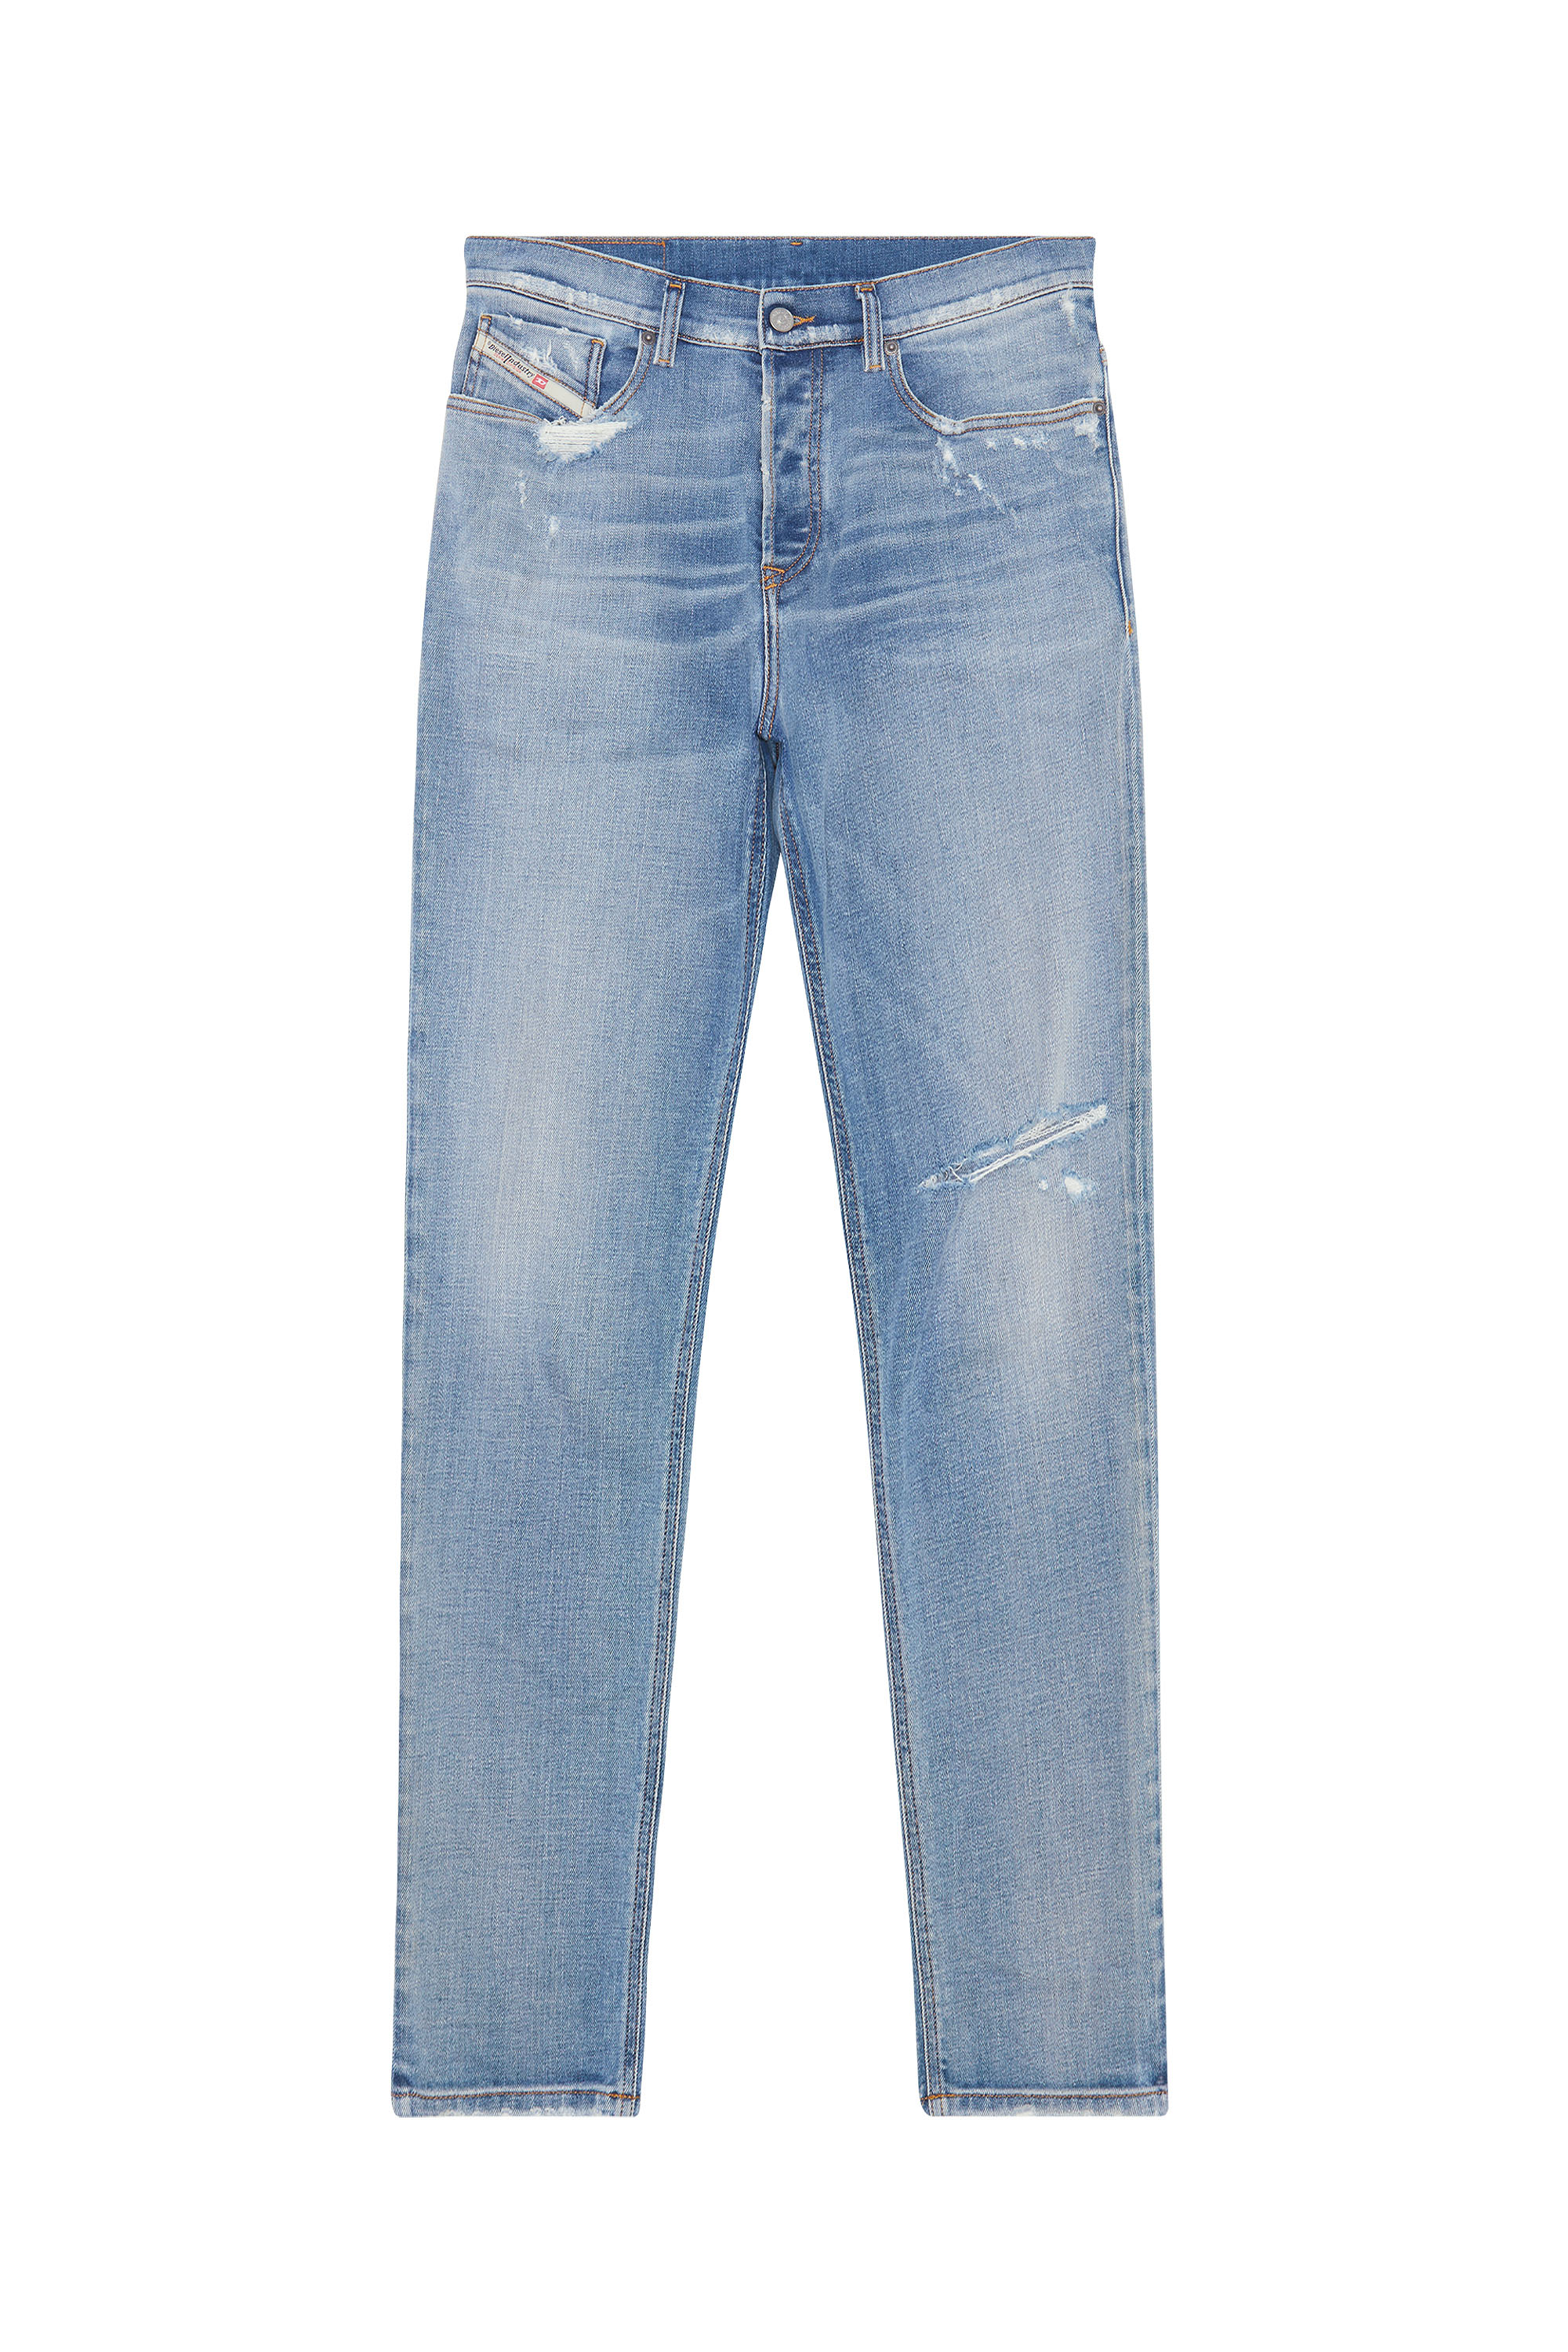 2005 D-FINING 09E17 Tapered Jeans, Light Blue - Jeans